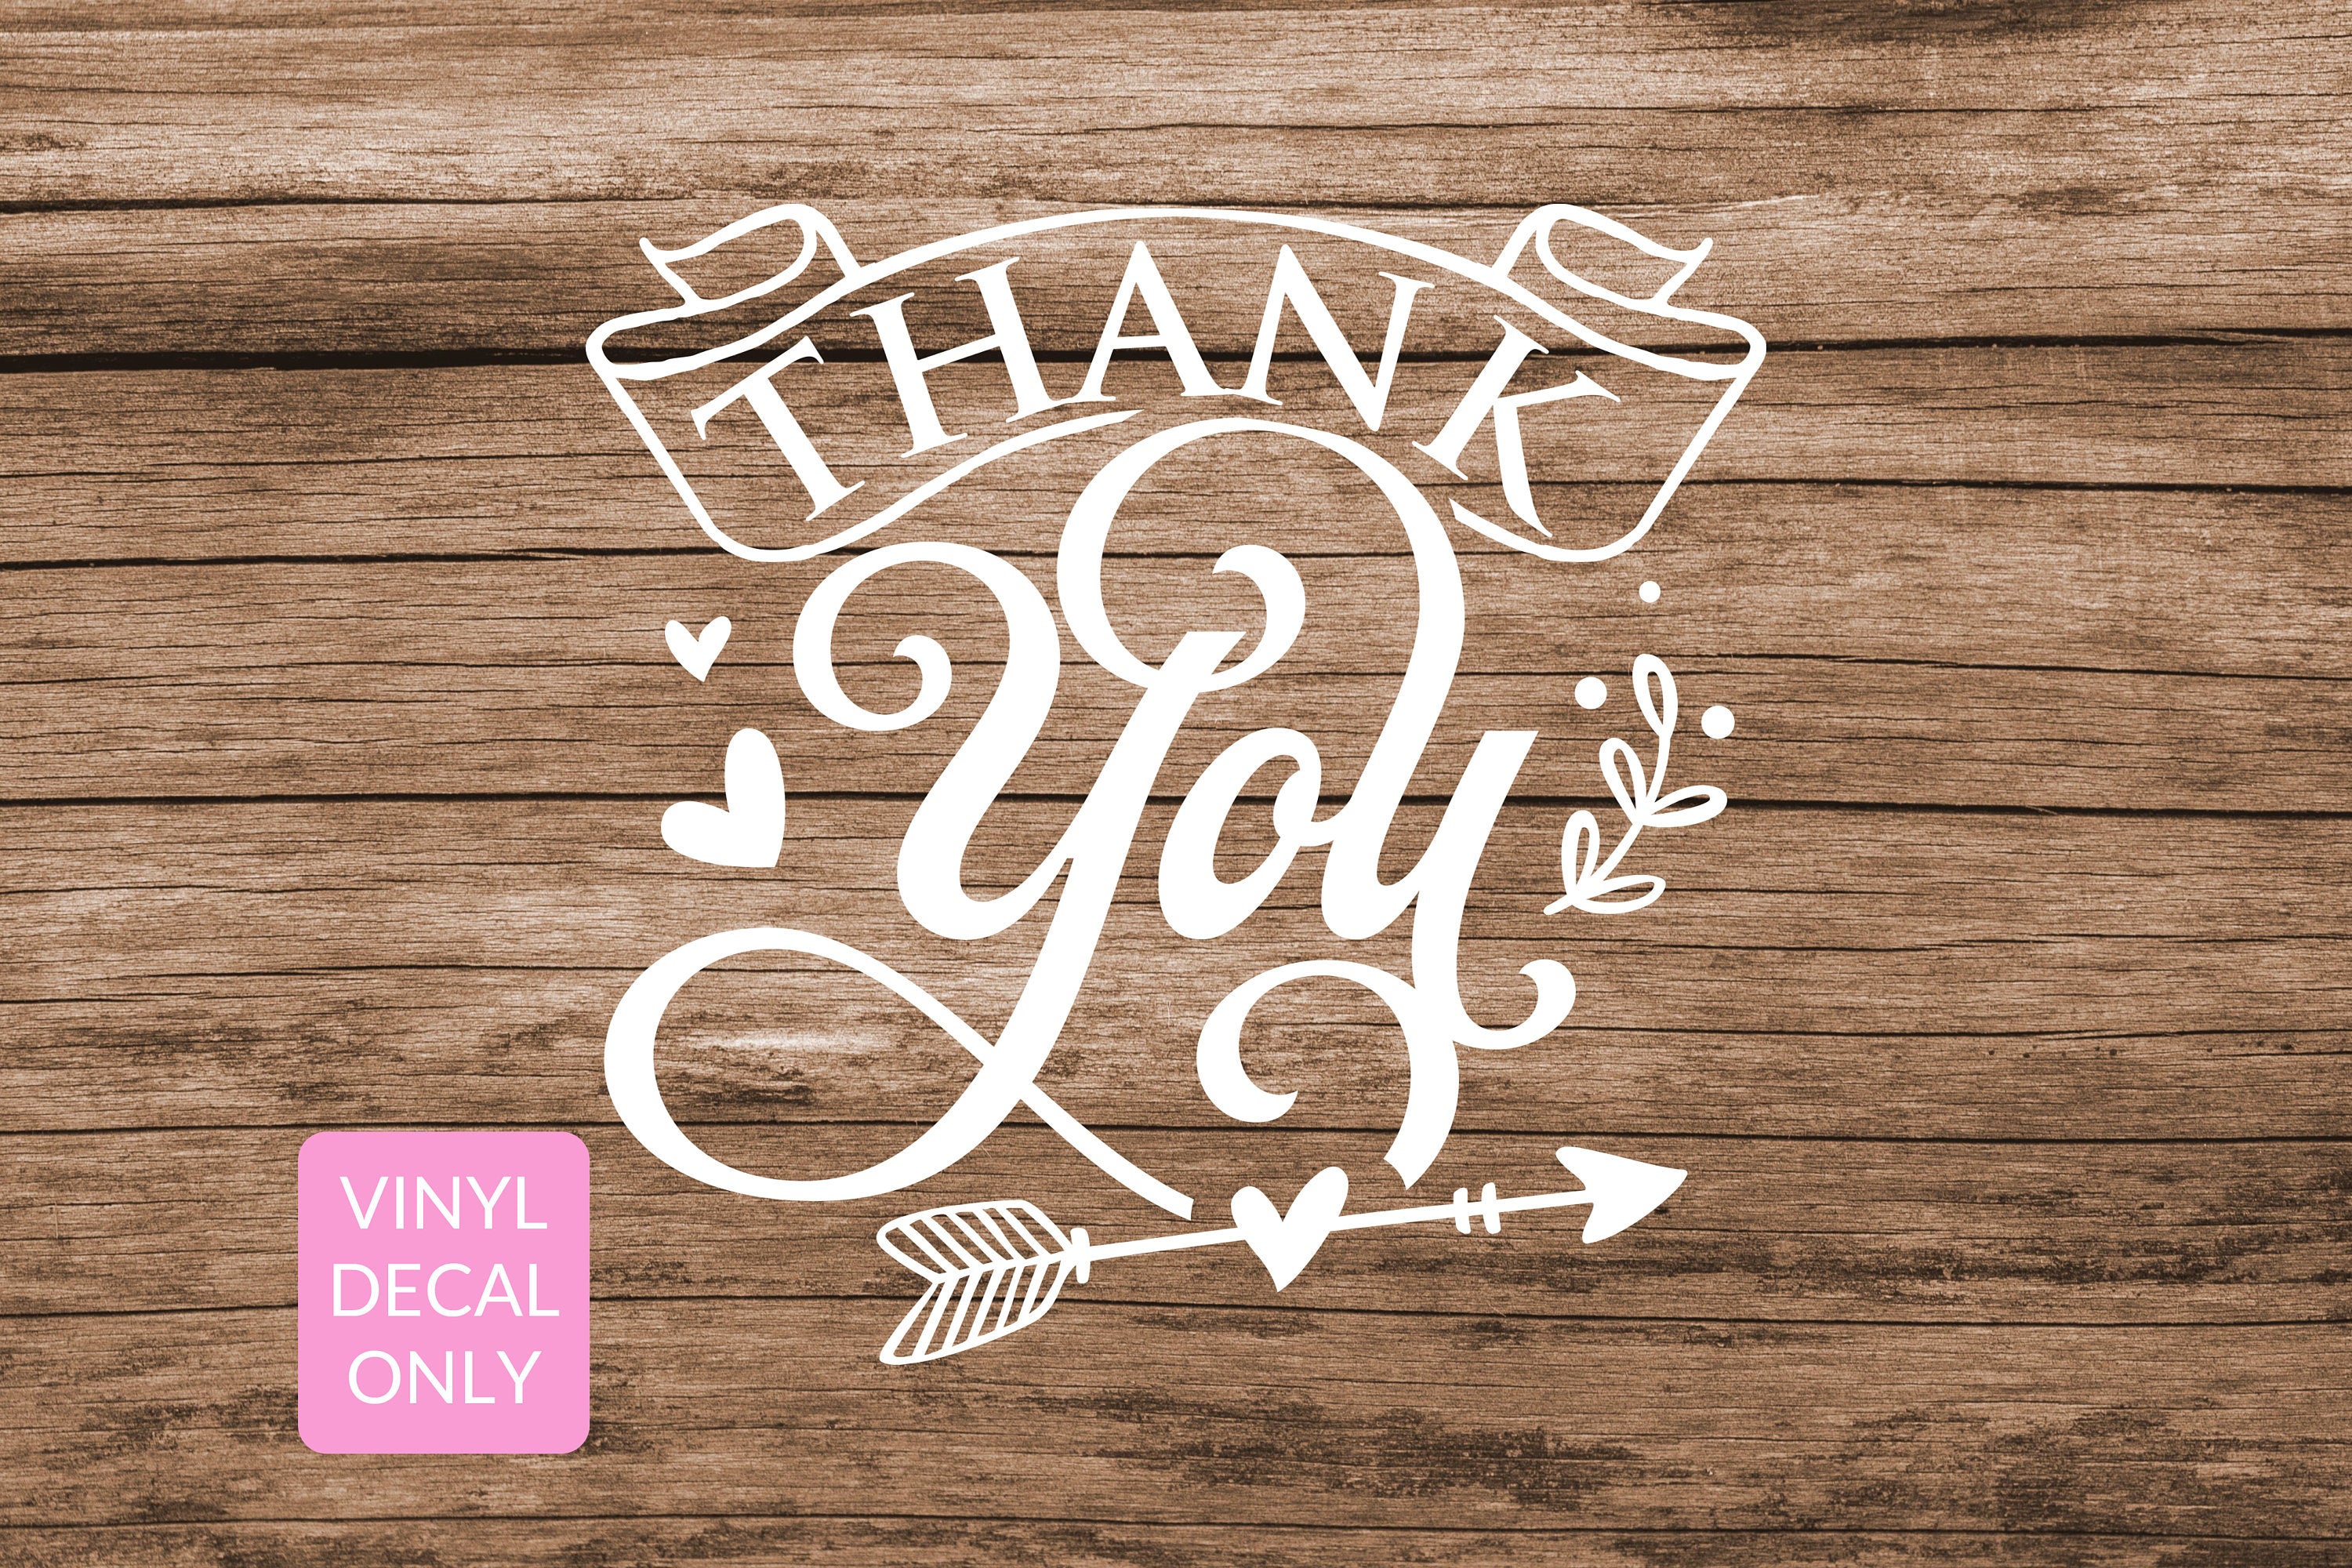 Thank You Vinyl Decal for DIY Signs, Wedding Ceremony & Reception, Event, Party Signs, for Wood, Metal, Glass, Walls, Doors